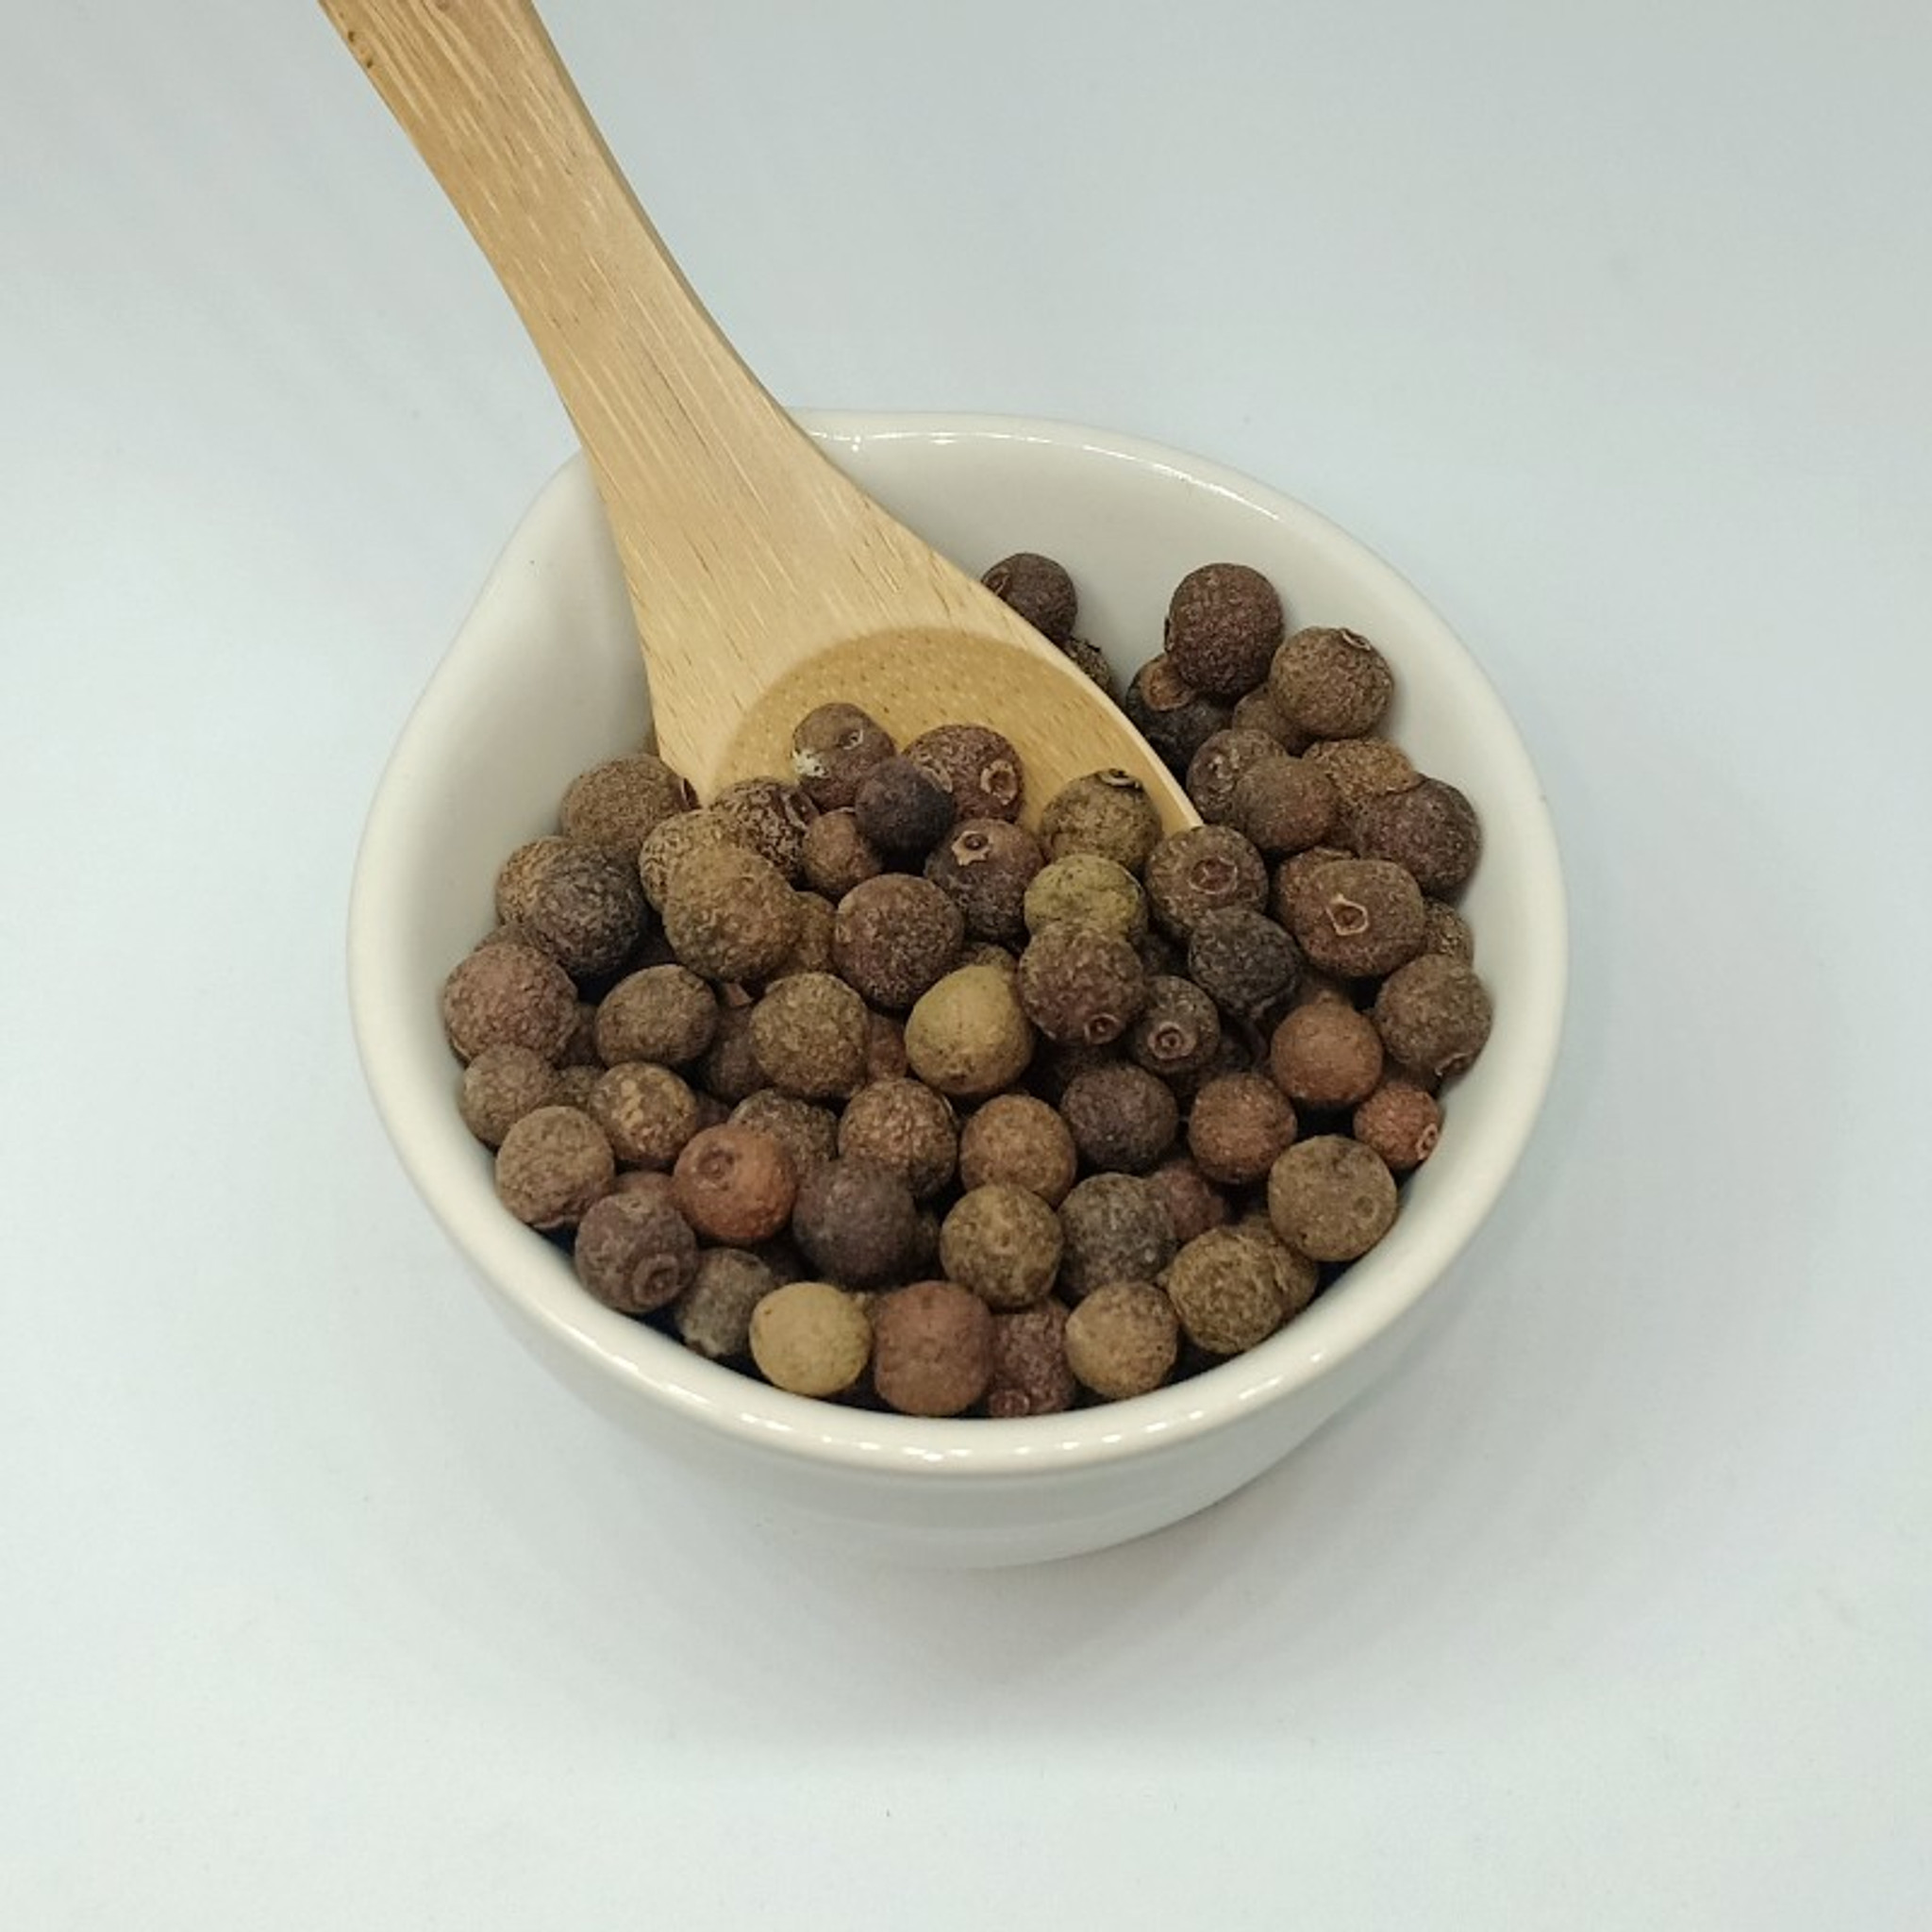 KYOCERA > Excellent for whole spices, salts, peppercorns and dried